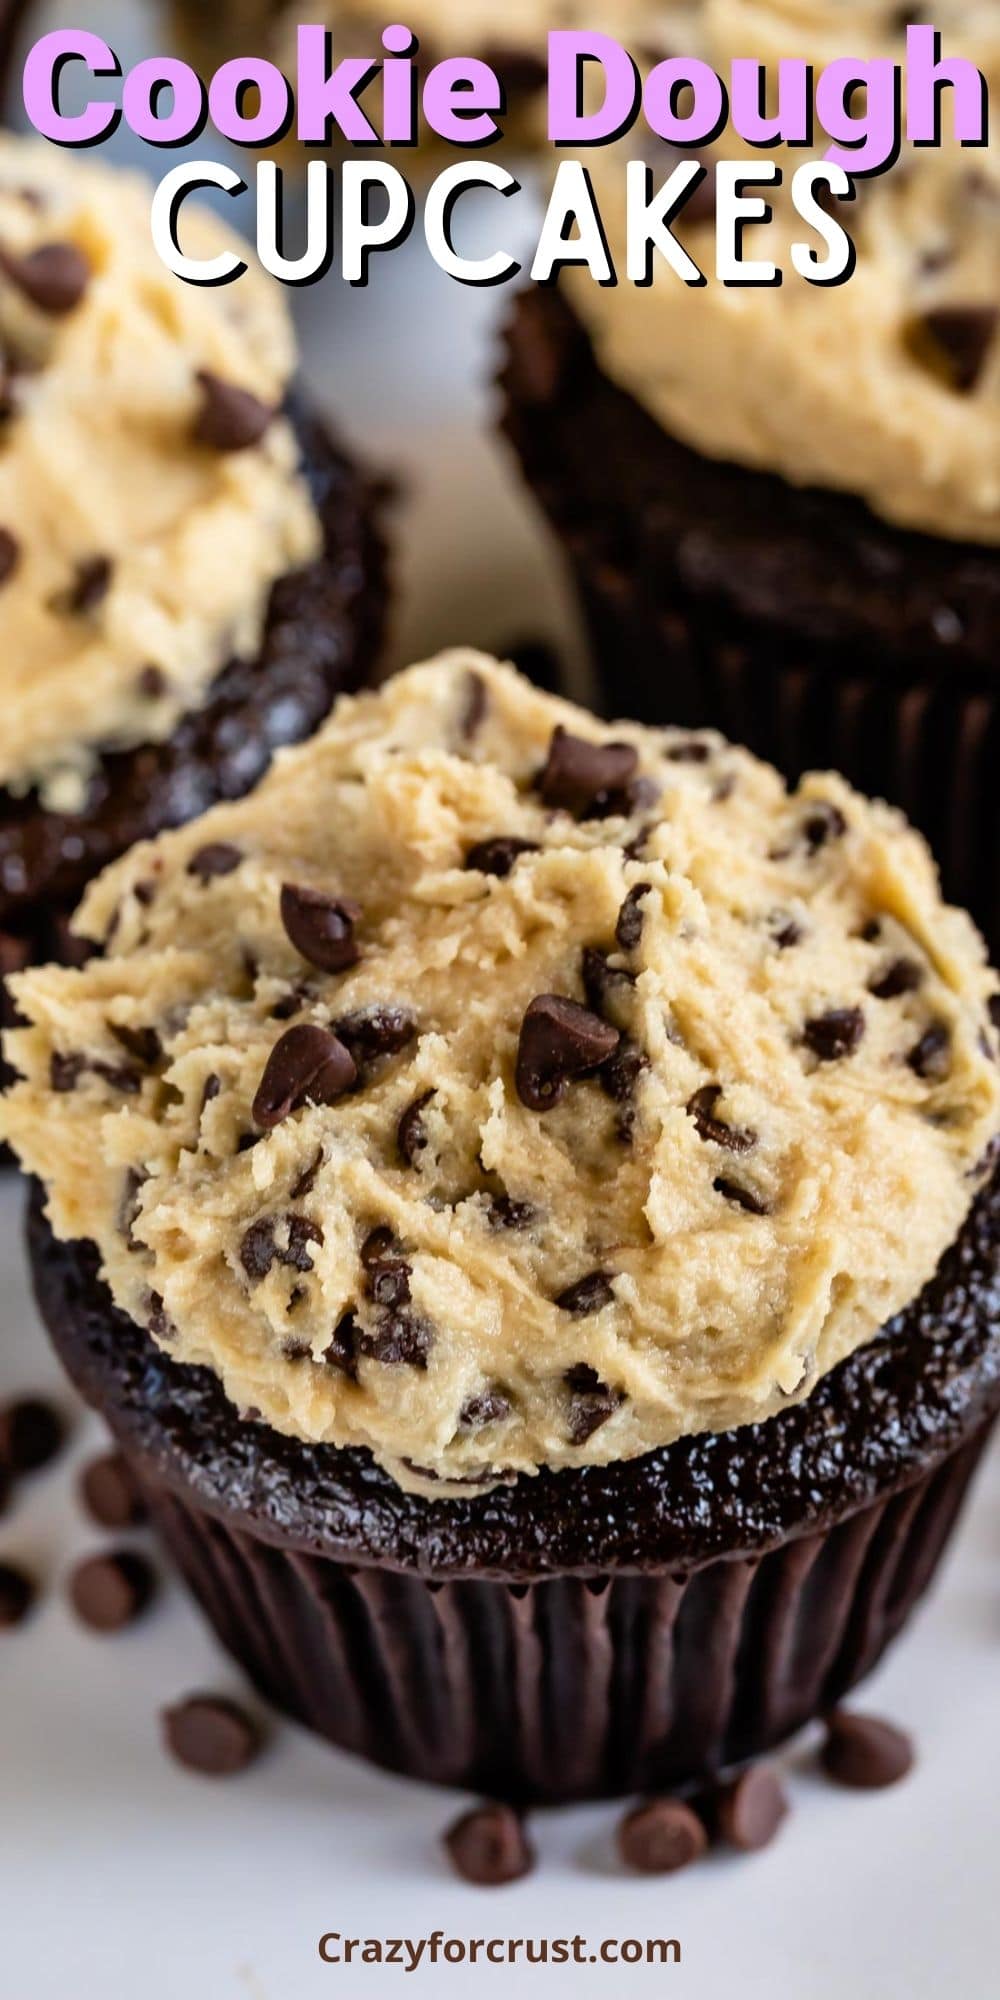 Chocolate cupcakes with cookie dough frosting and mini chocolate chips on top and recipe title on top of image